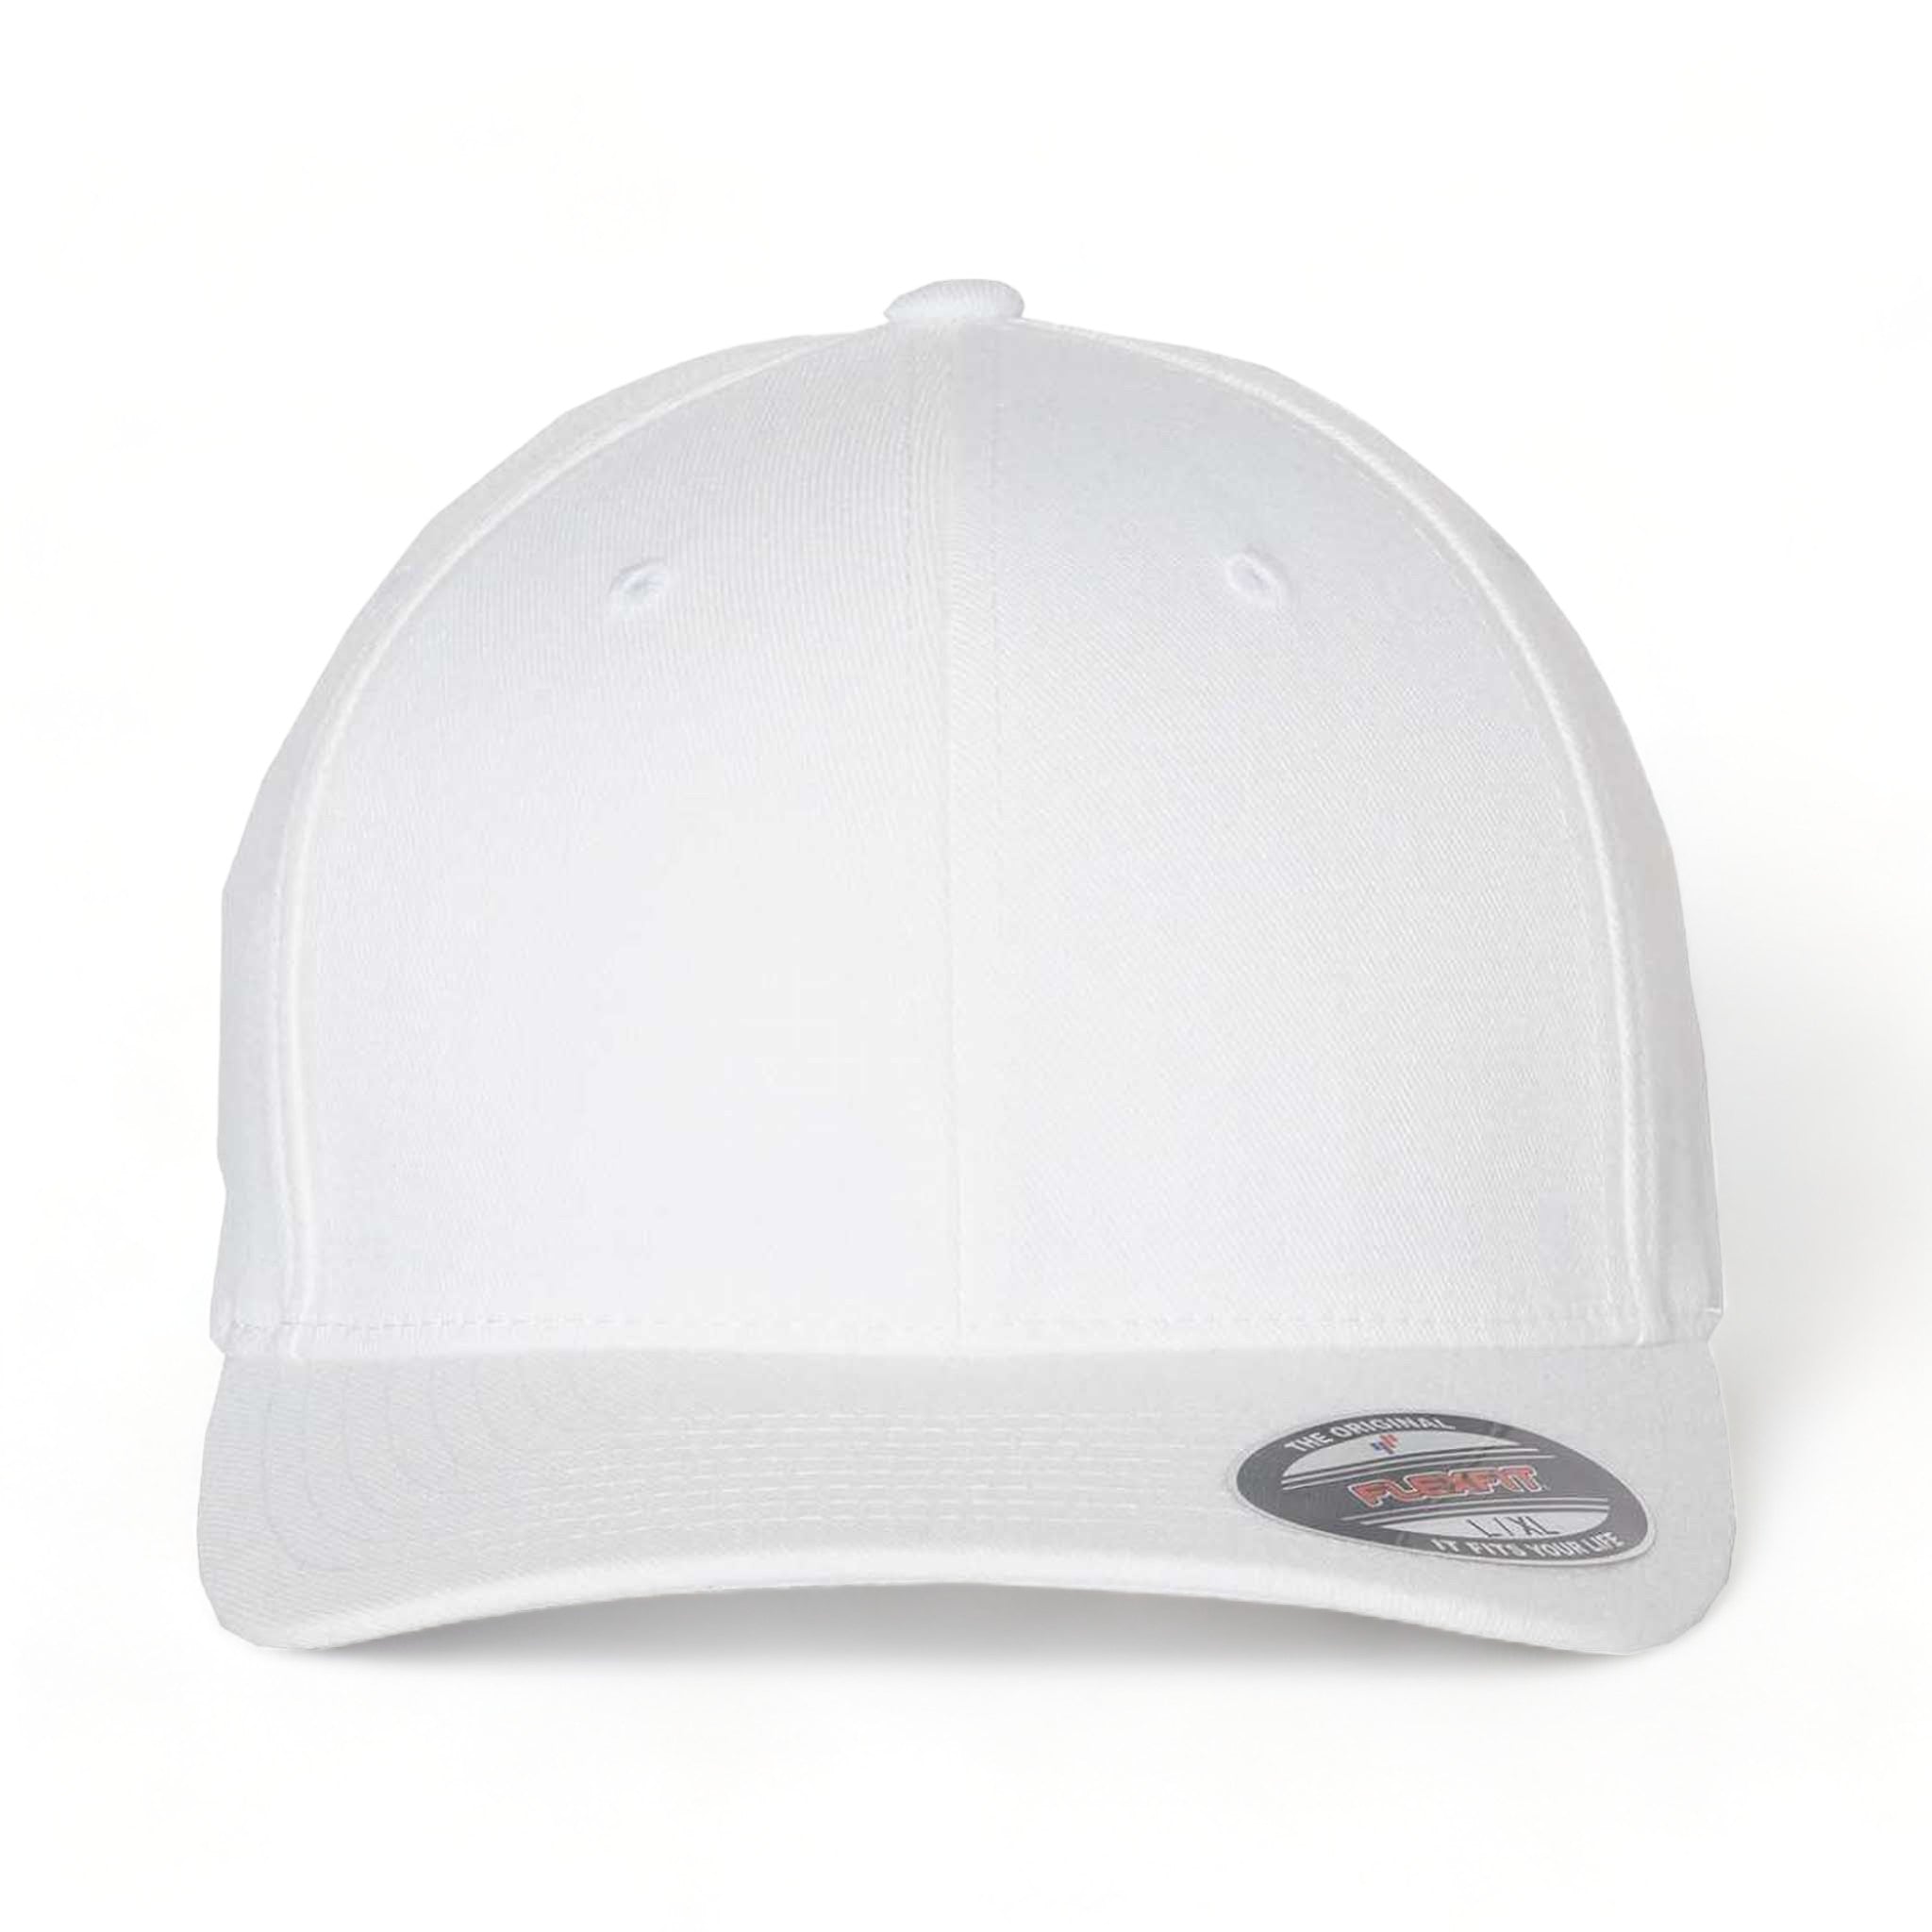 Front view of Flexfit 6580 custom hat in white